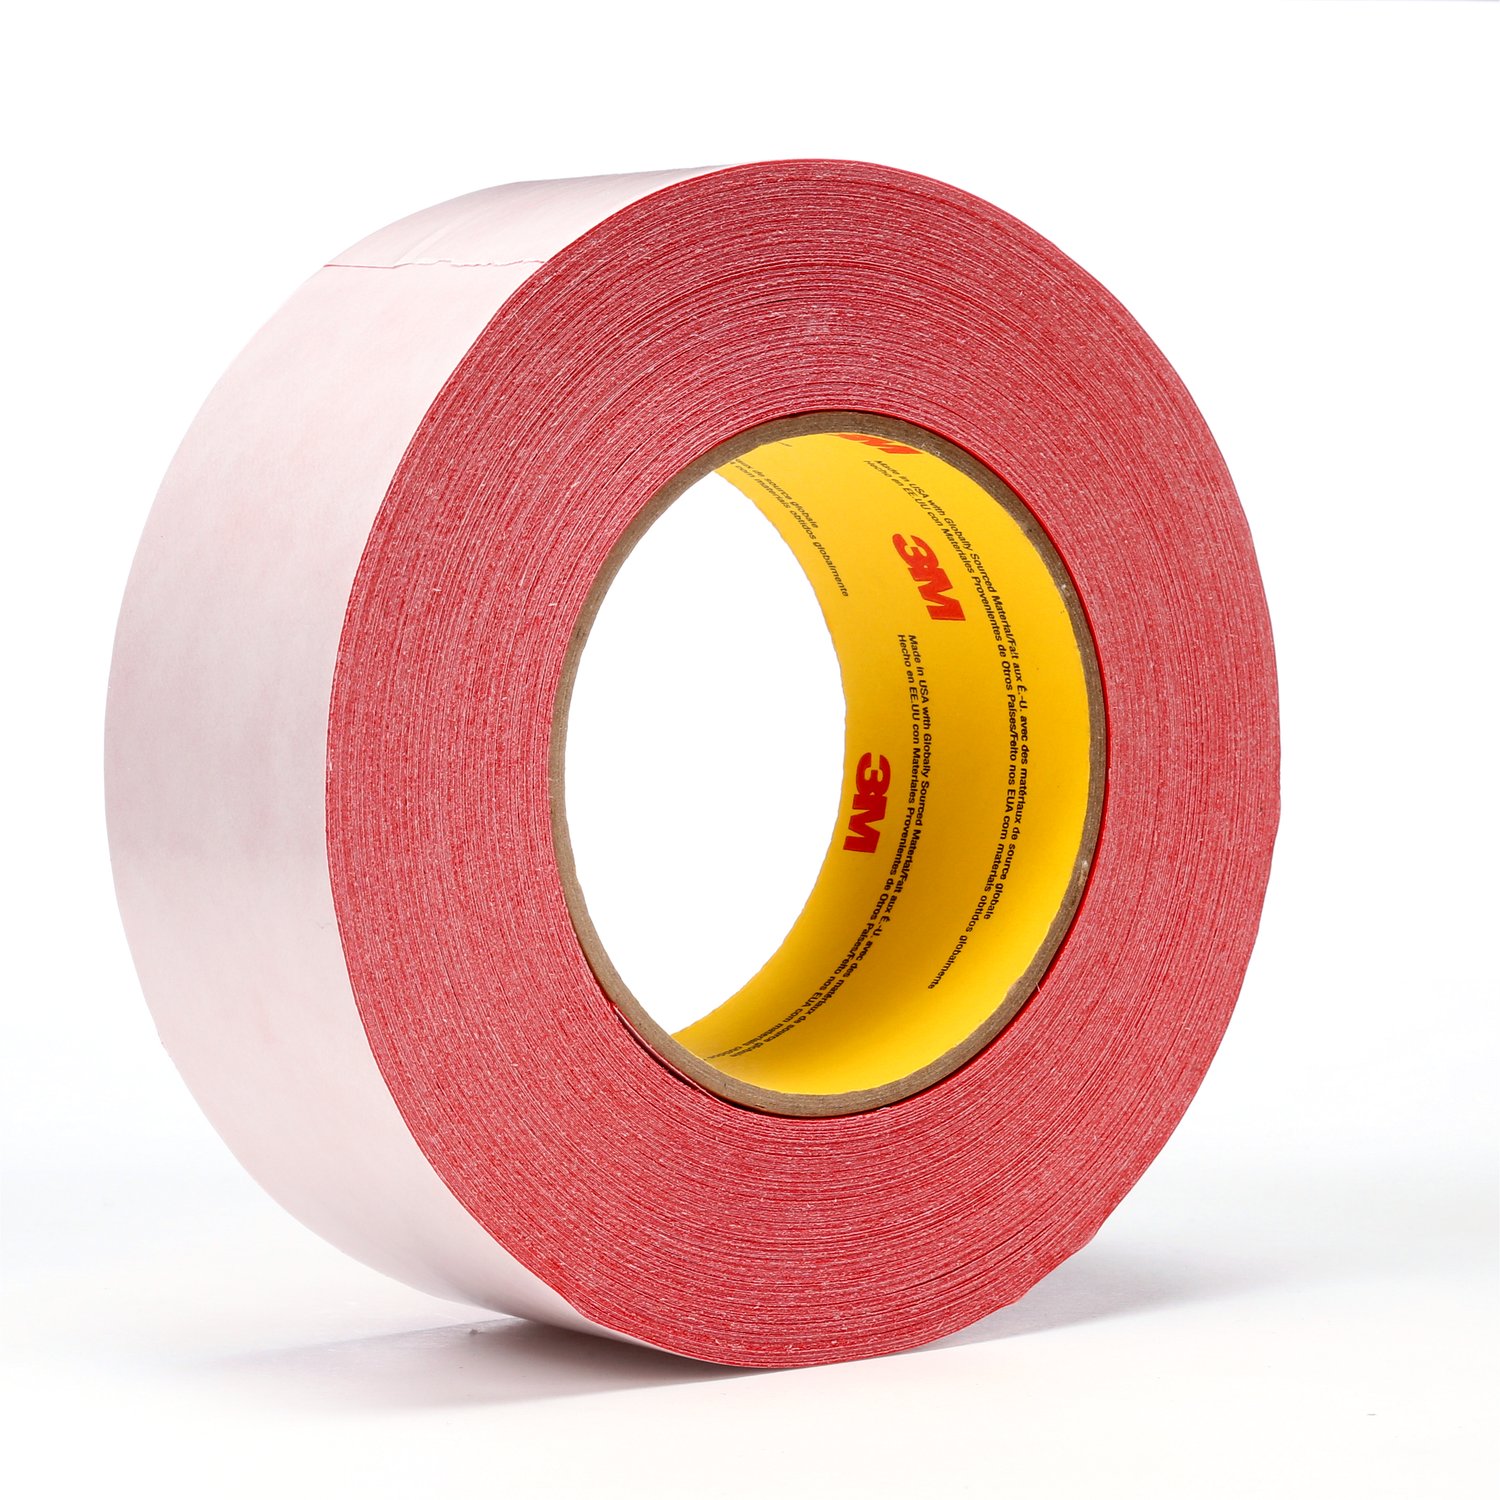 7000049265 - 3M Double Coated Tape 9737R, Red, 48 mm x 55 m, 3.5 mil, 24 rolls per
case